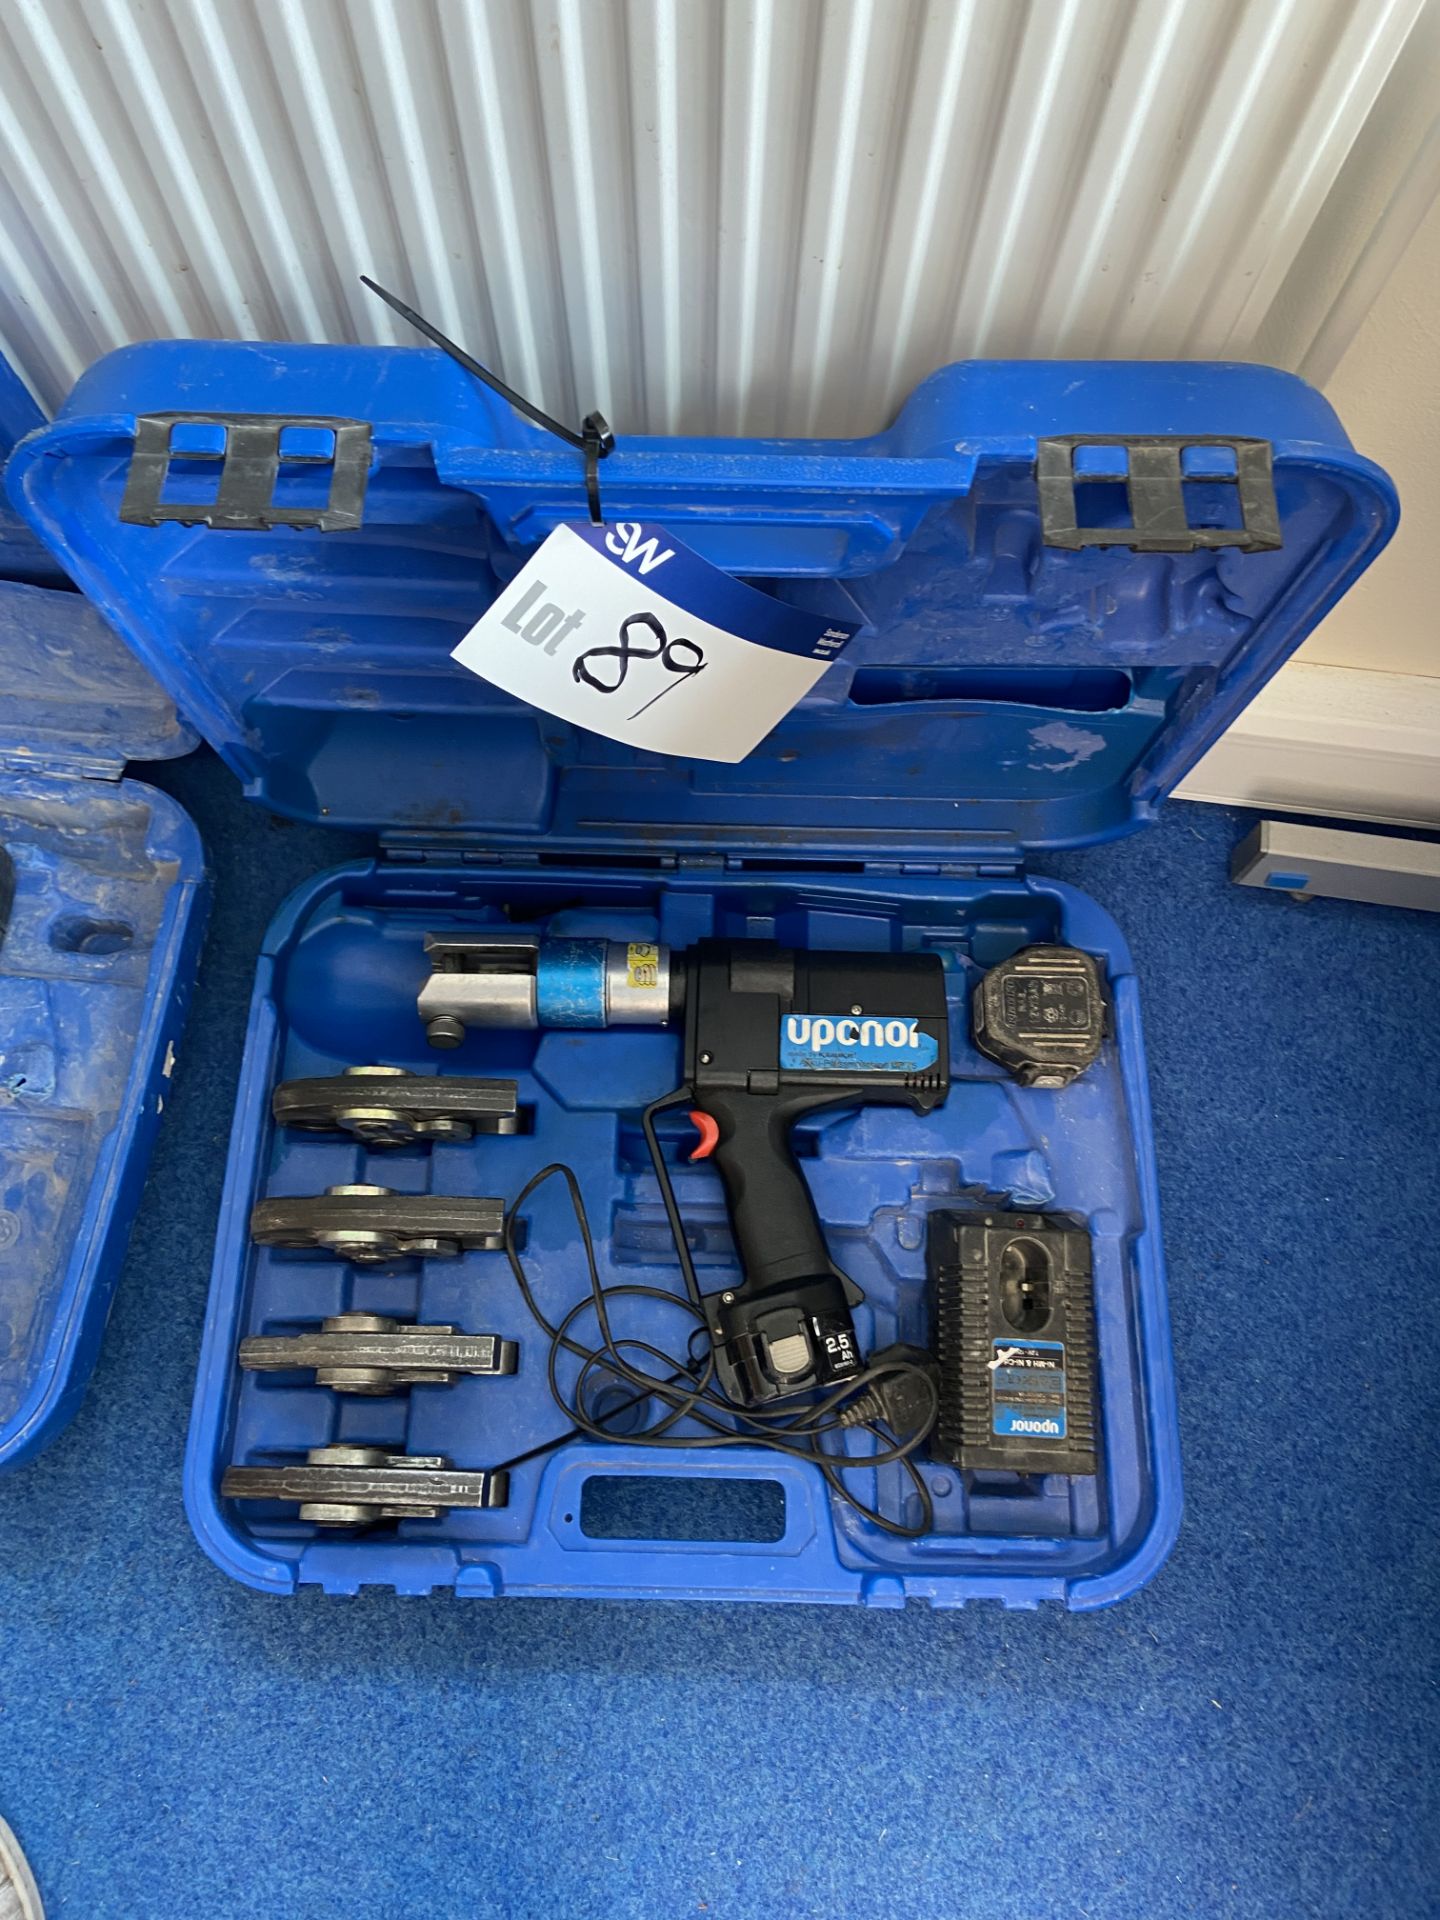 Uponor UP75 Press Tool, with spare battery, charger, tooling and carry casePlease read the following